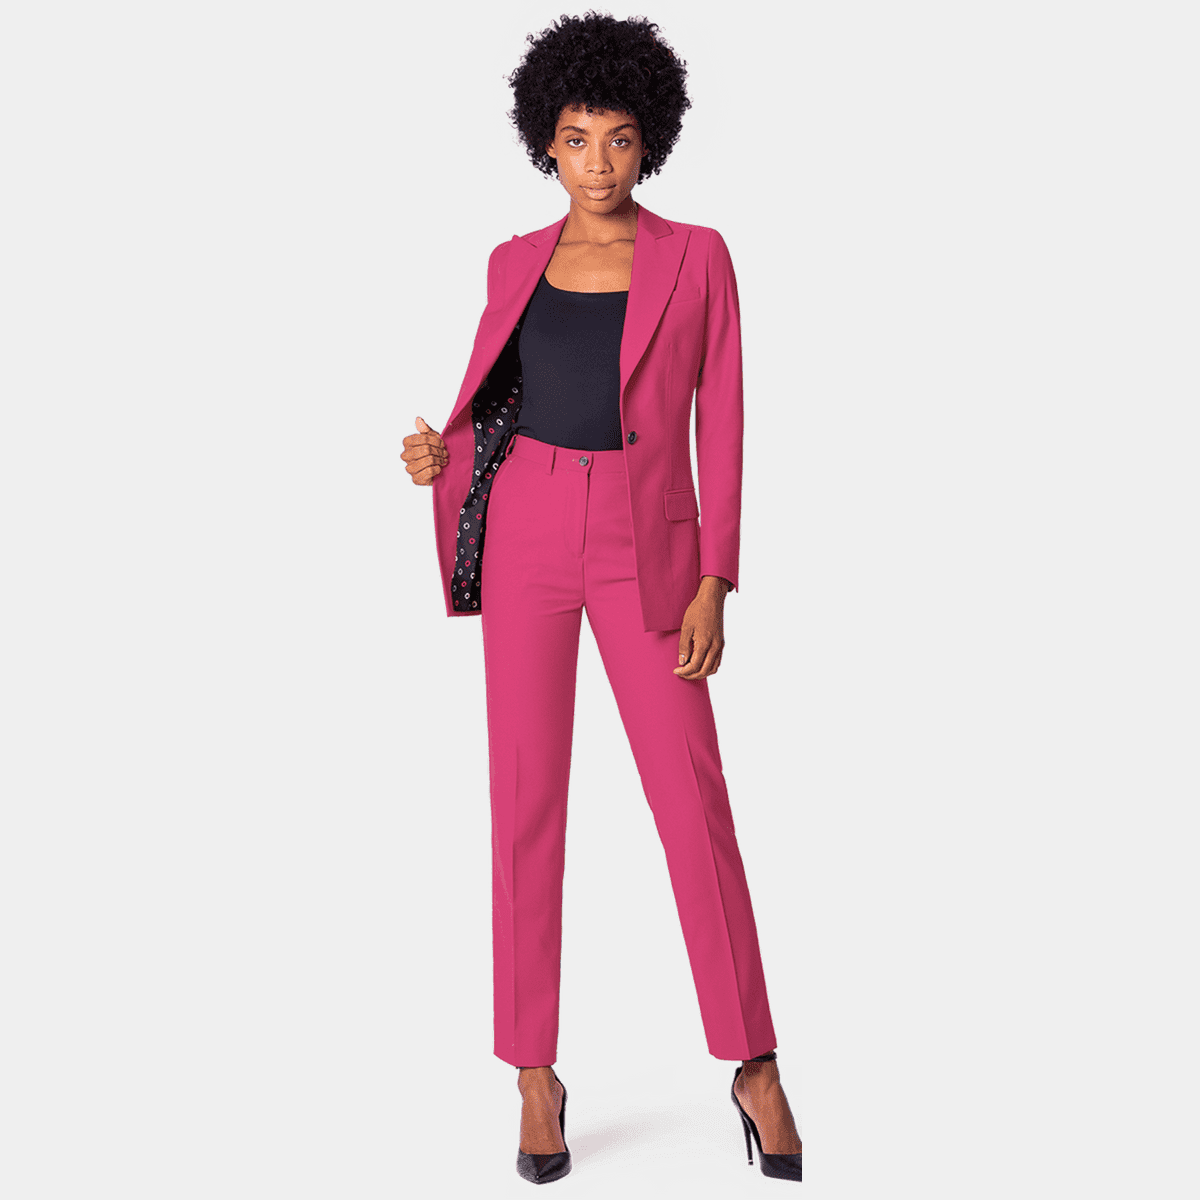 Pink Suit Jacket + Pant + Vest set, Woman Designer Pant Suit Variance  Colored Long Slim Cut Tight Fit for Casual/ Formal Gift for her